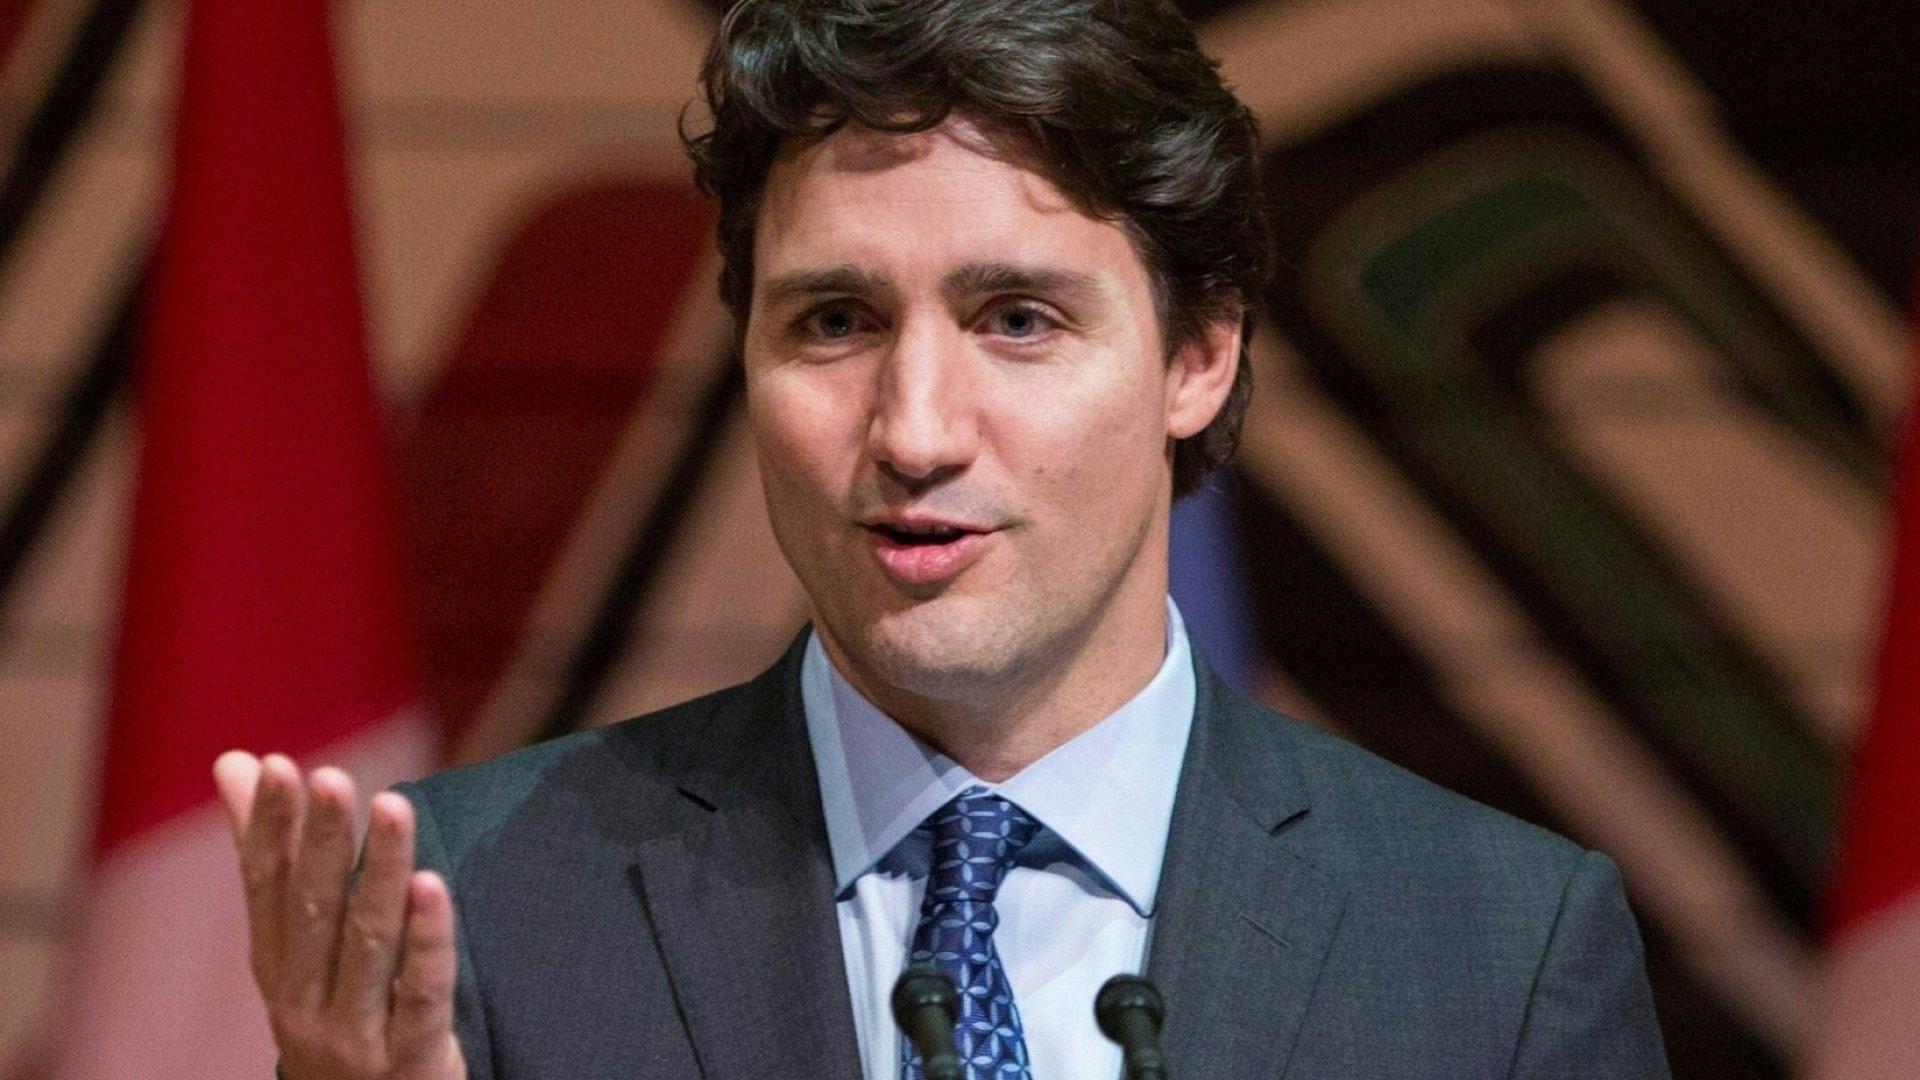 Who is Justin Trudeau: Biography, Personal Life, Family, Career and Net Worth